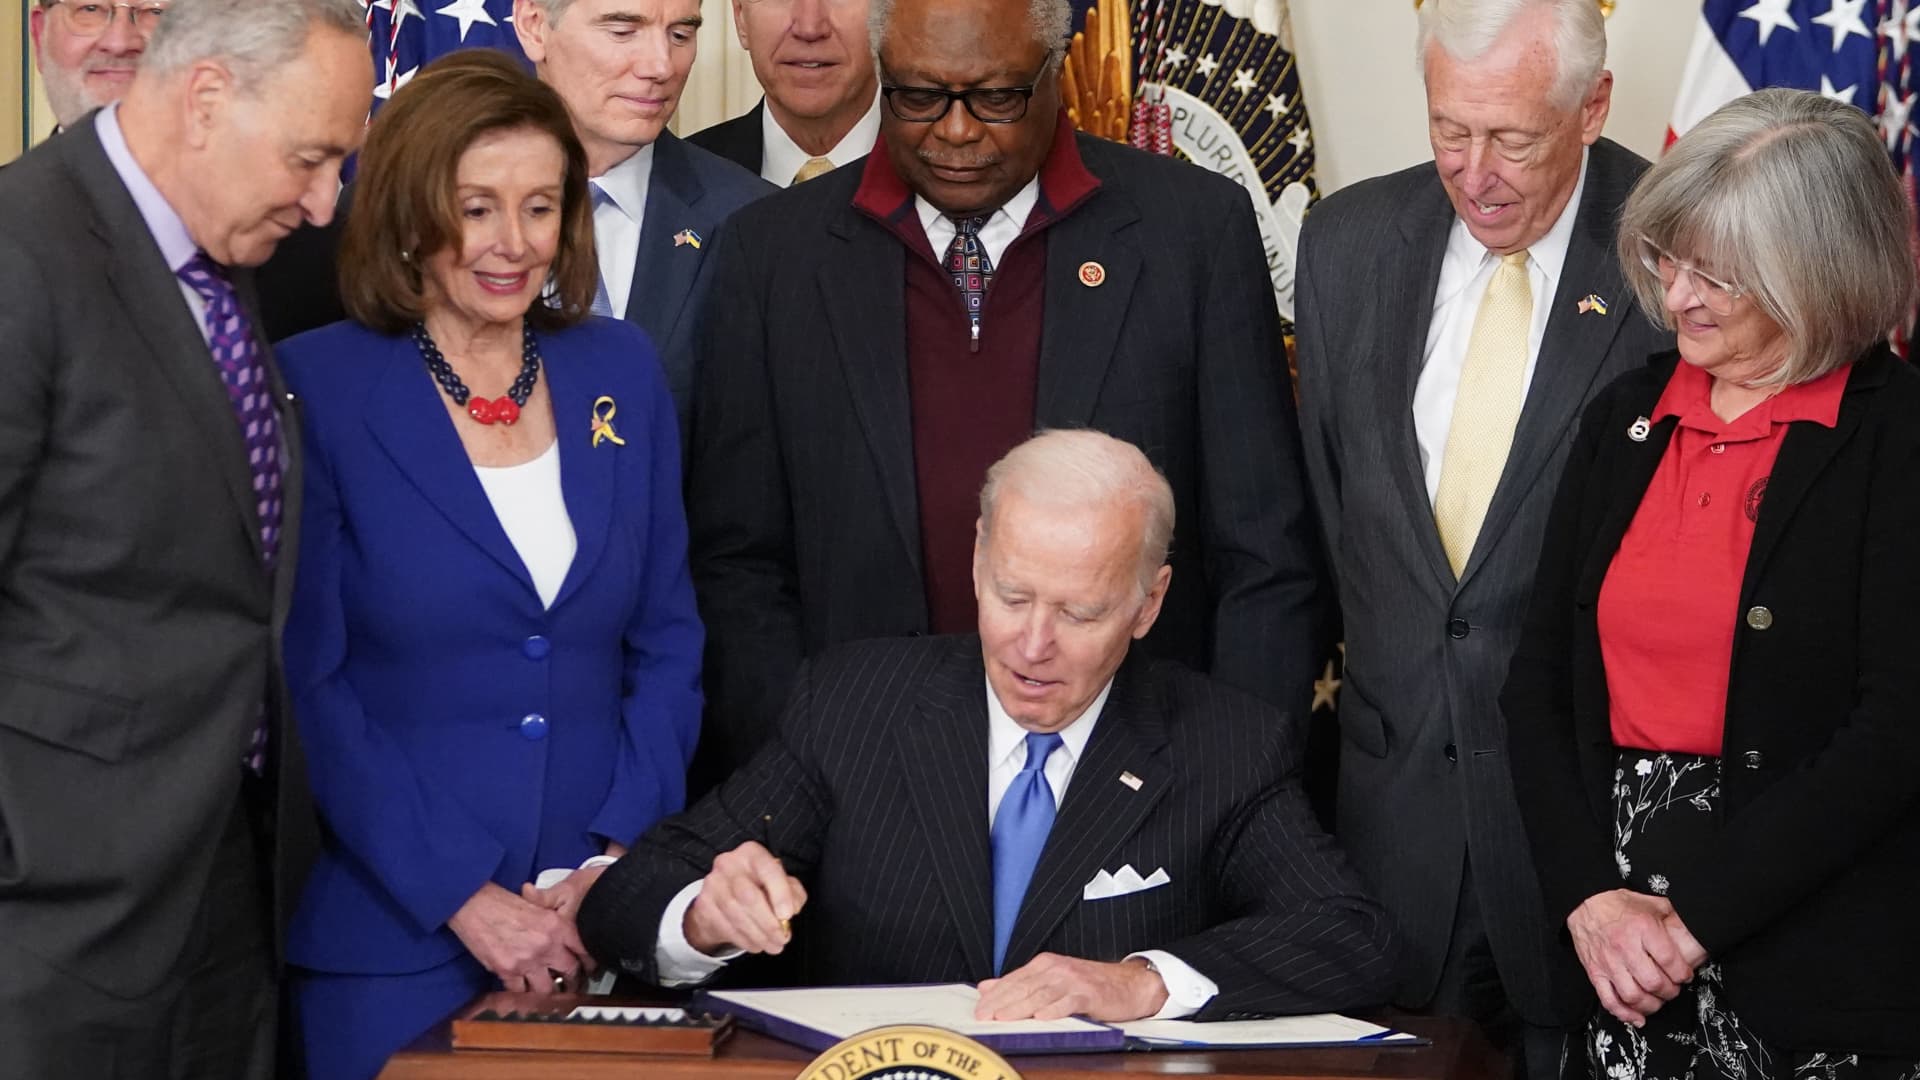 US President Joe Biden signs H.R. 3076, the Postal Service Reform Act of 2022, during a ceremony in the State Dining Room of the White House in Washington, DC, on April 6, 2022.